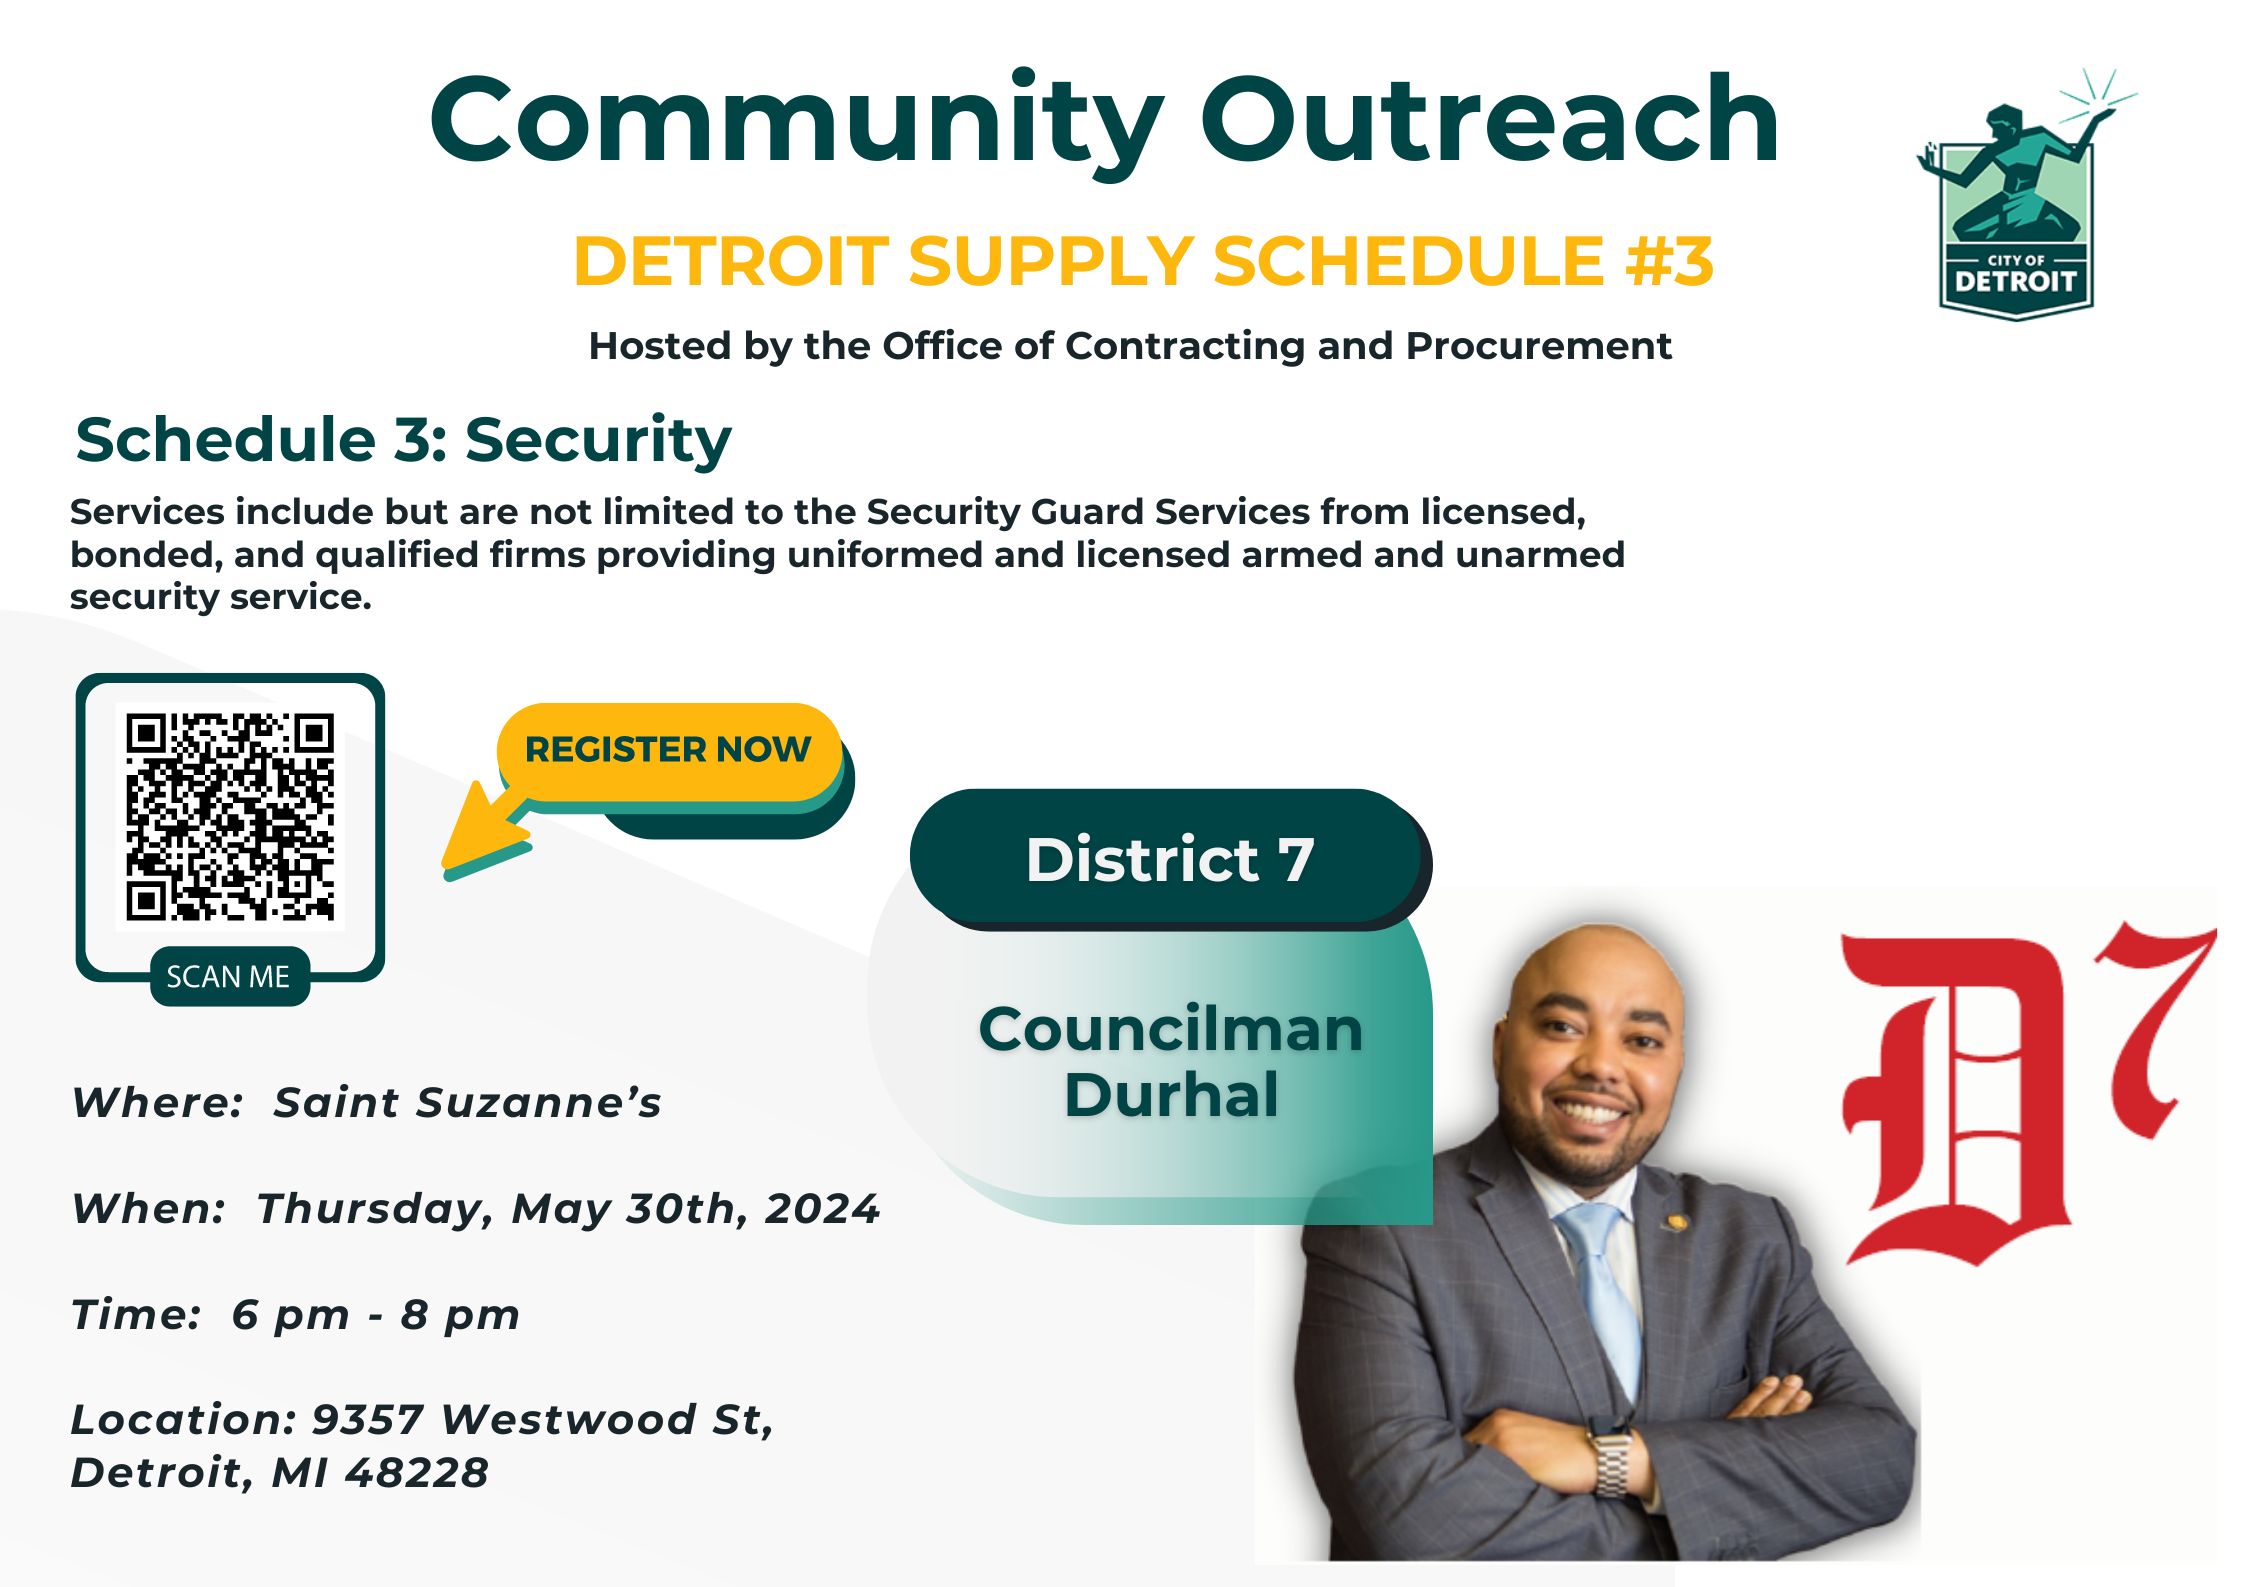 Community Outreach DSS#3 - Security (May 30th)